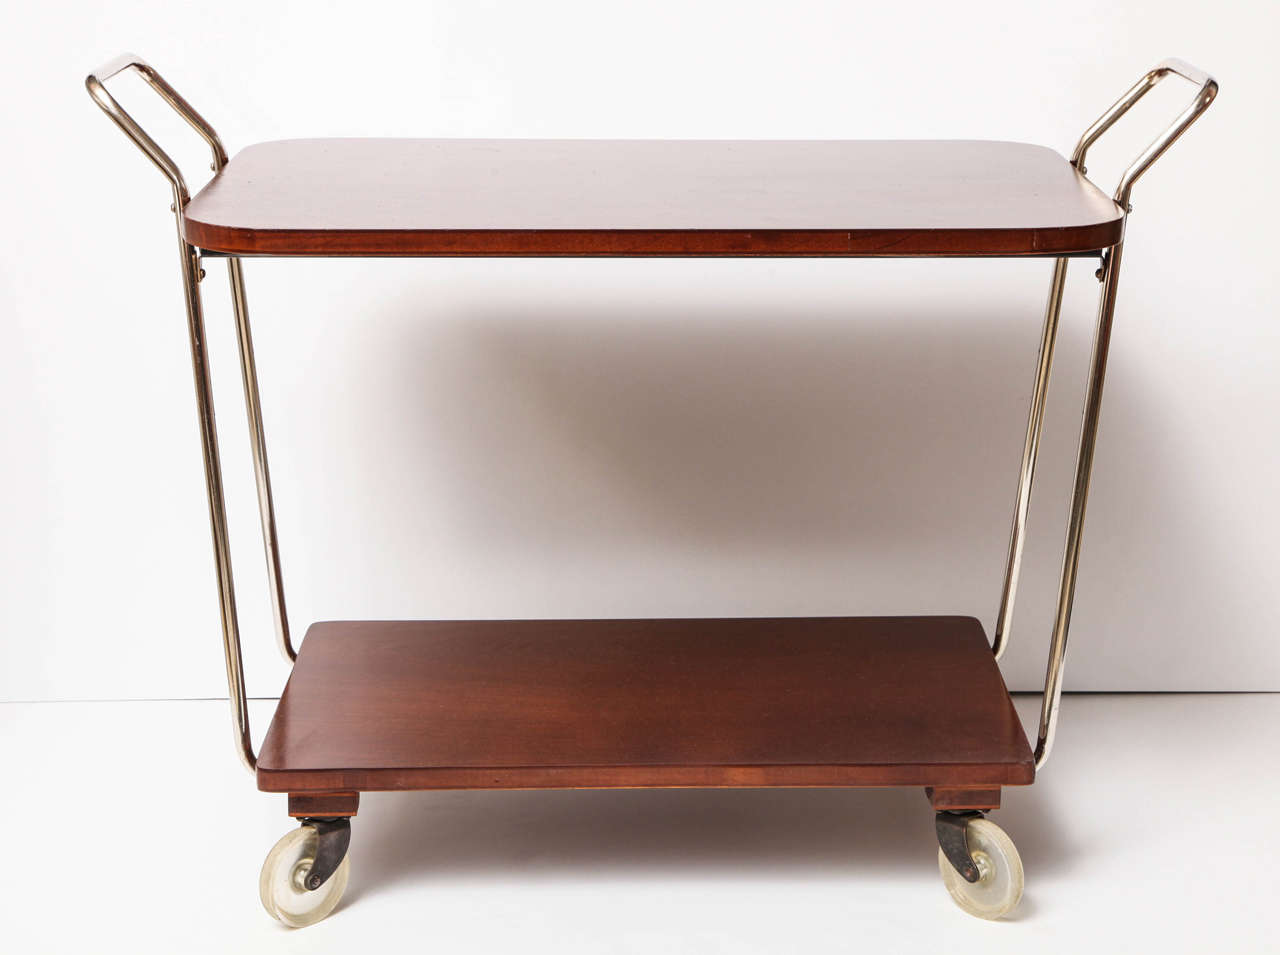 Bar cart, C 1950. Wood with chrome details. The wood has been refinished and the chrome has been polished.